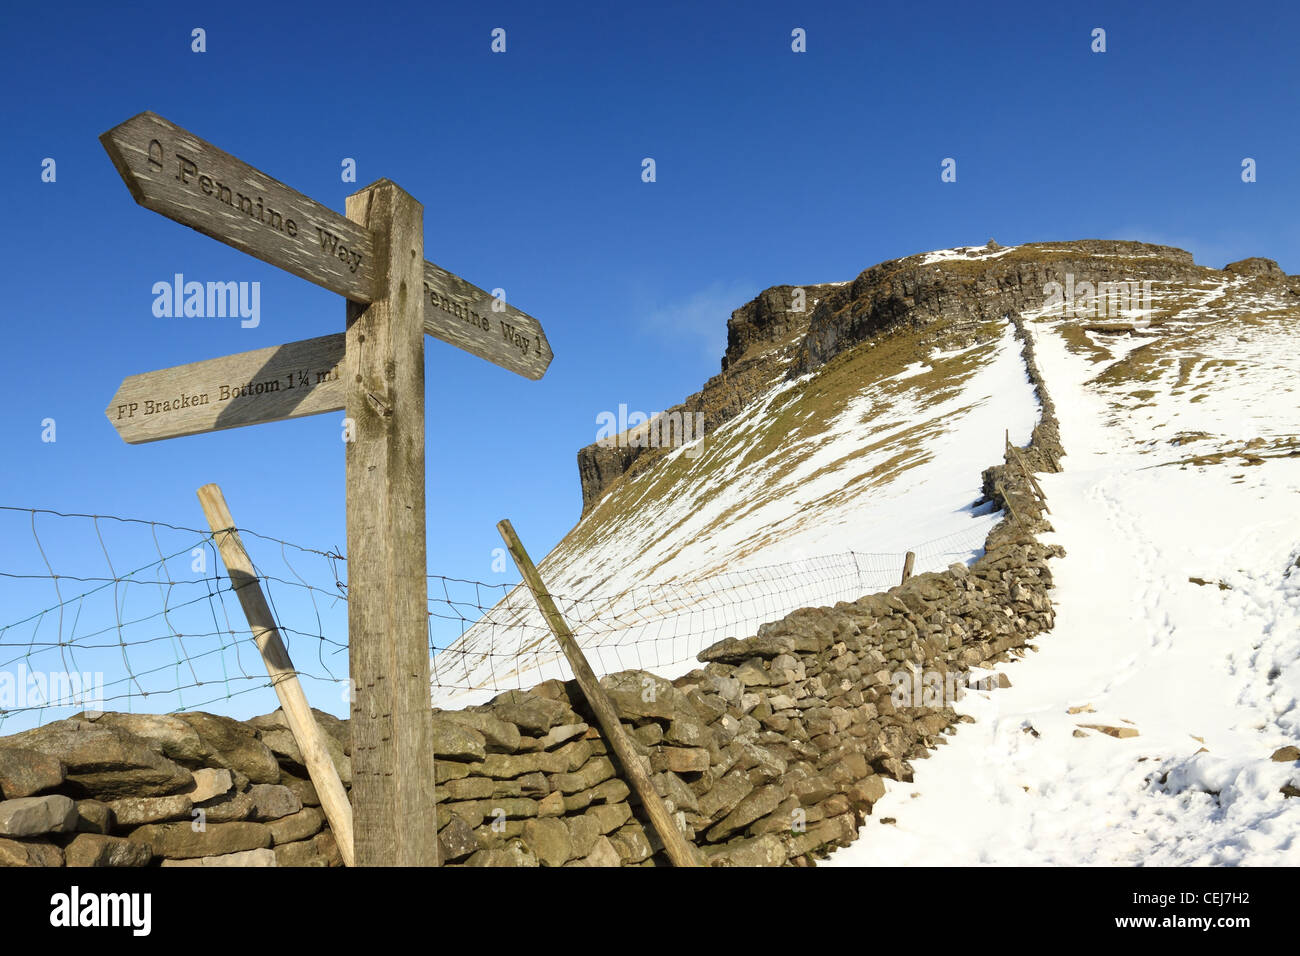 A Pennine Way sign points to the summit of a wintertime Pen-y-ghent, in the Yorkshire Dales national park. Stock Photo